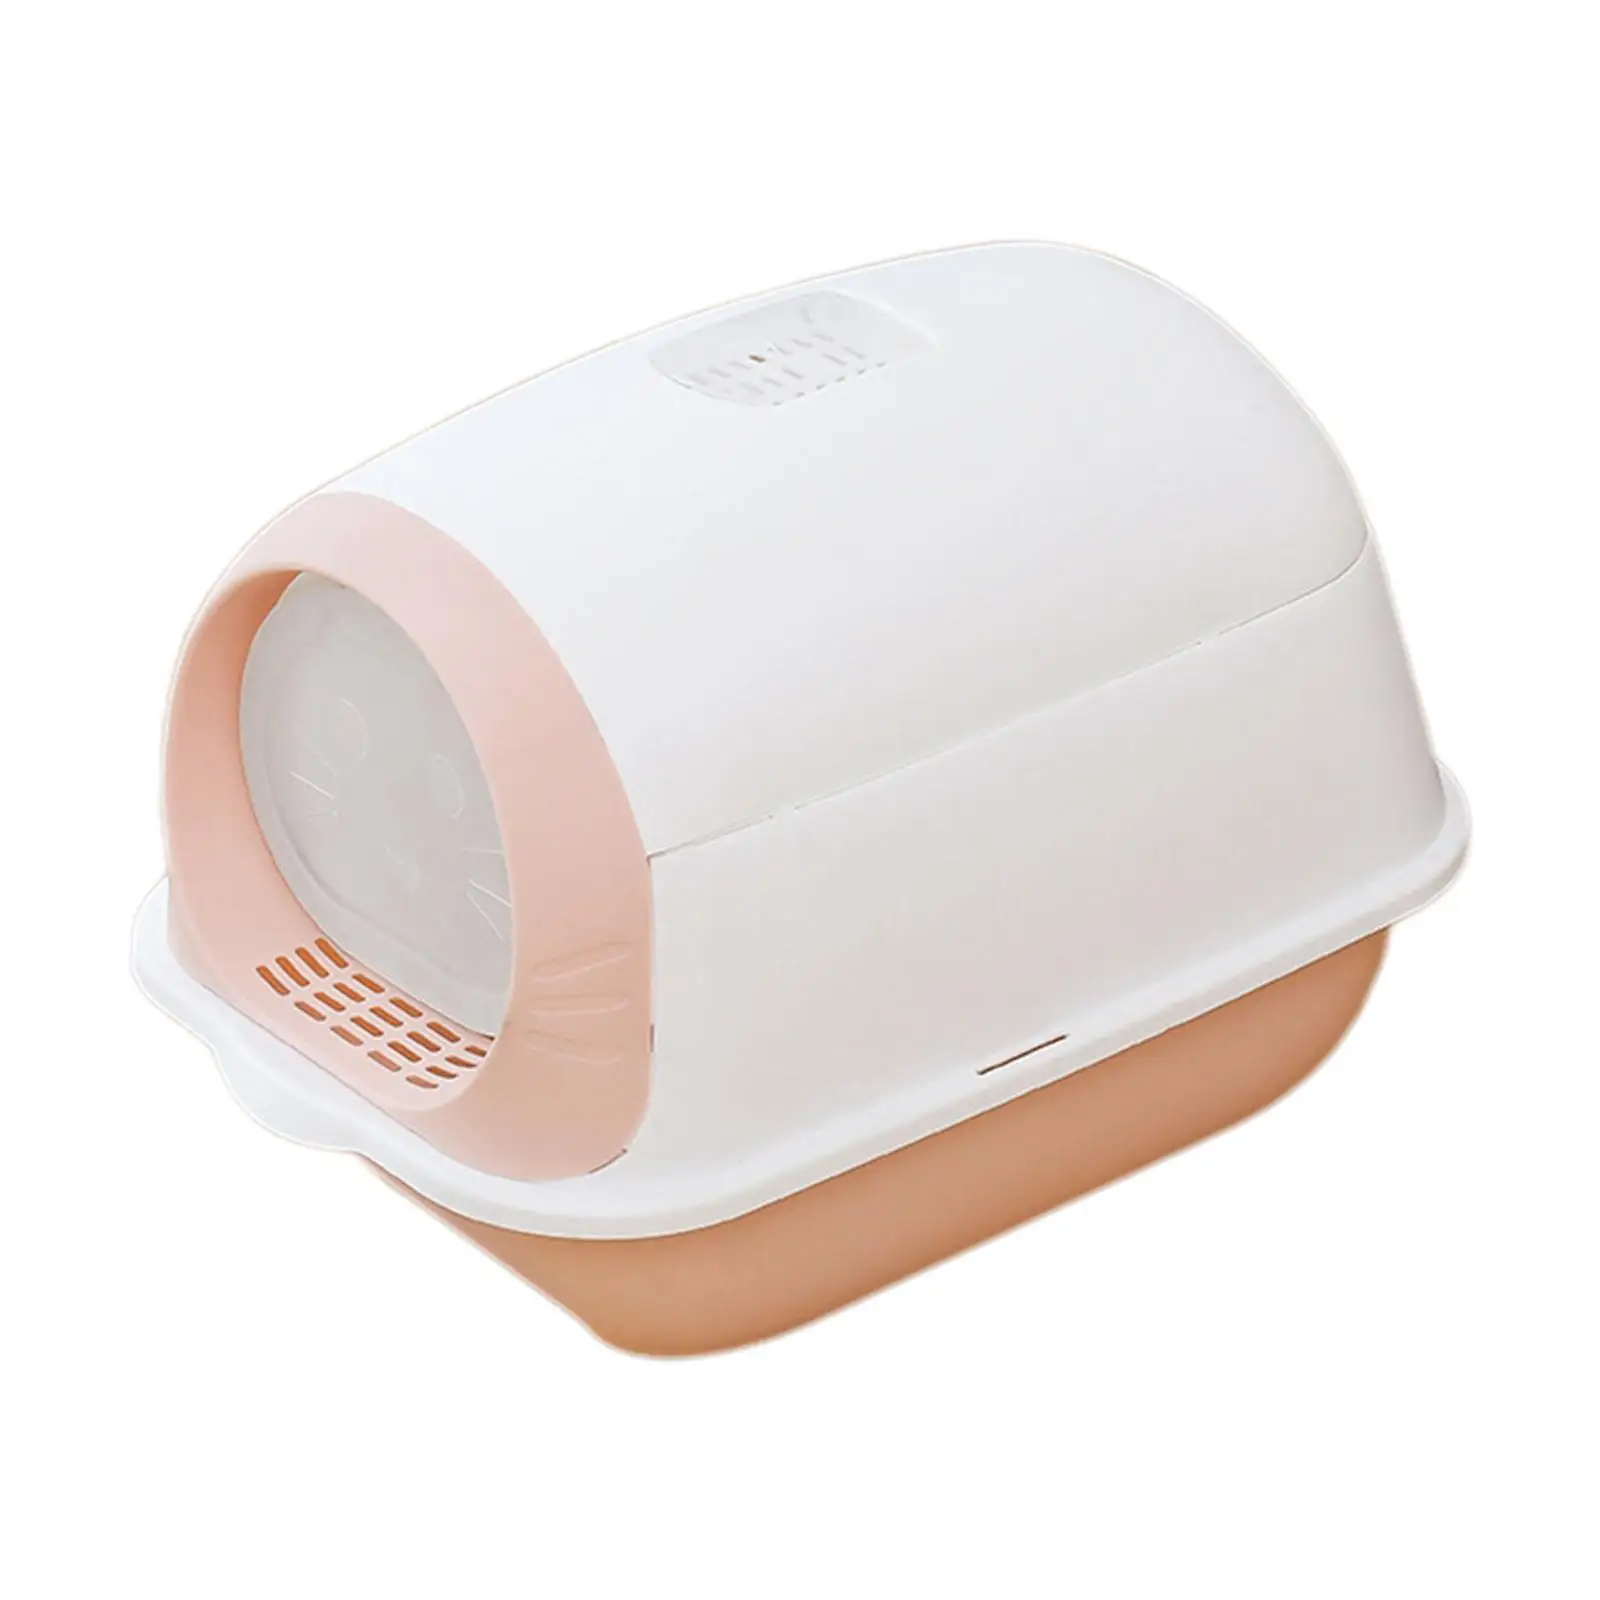 Hooded Cat Litter Box Enclosed Potty Toilet Spoon Bunny Pet Litter Tray